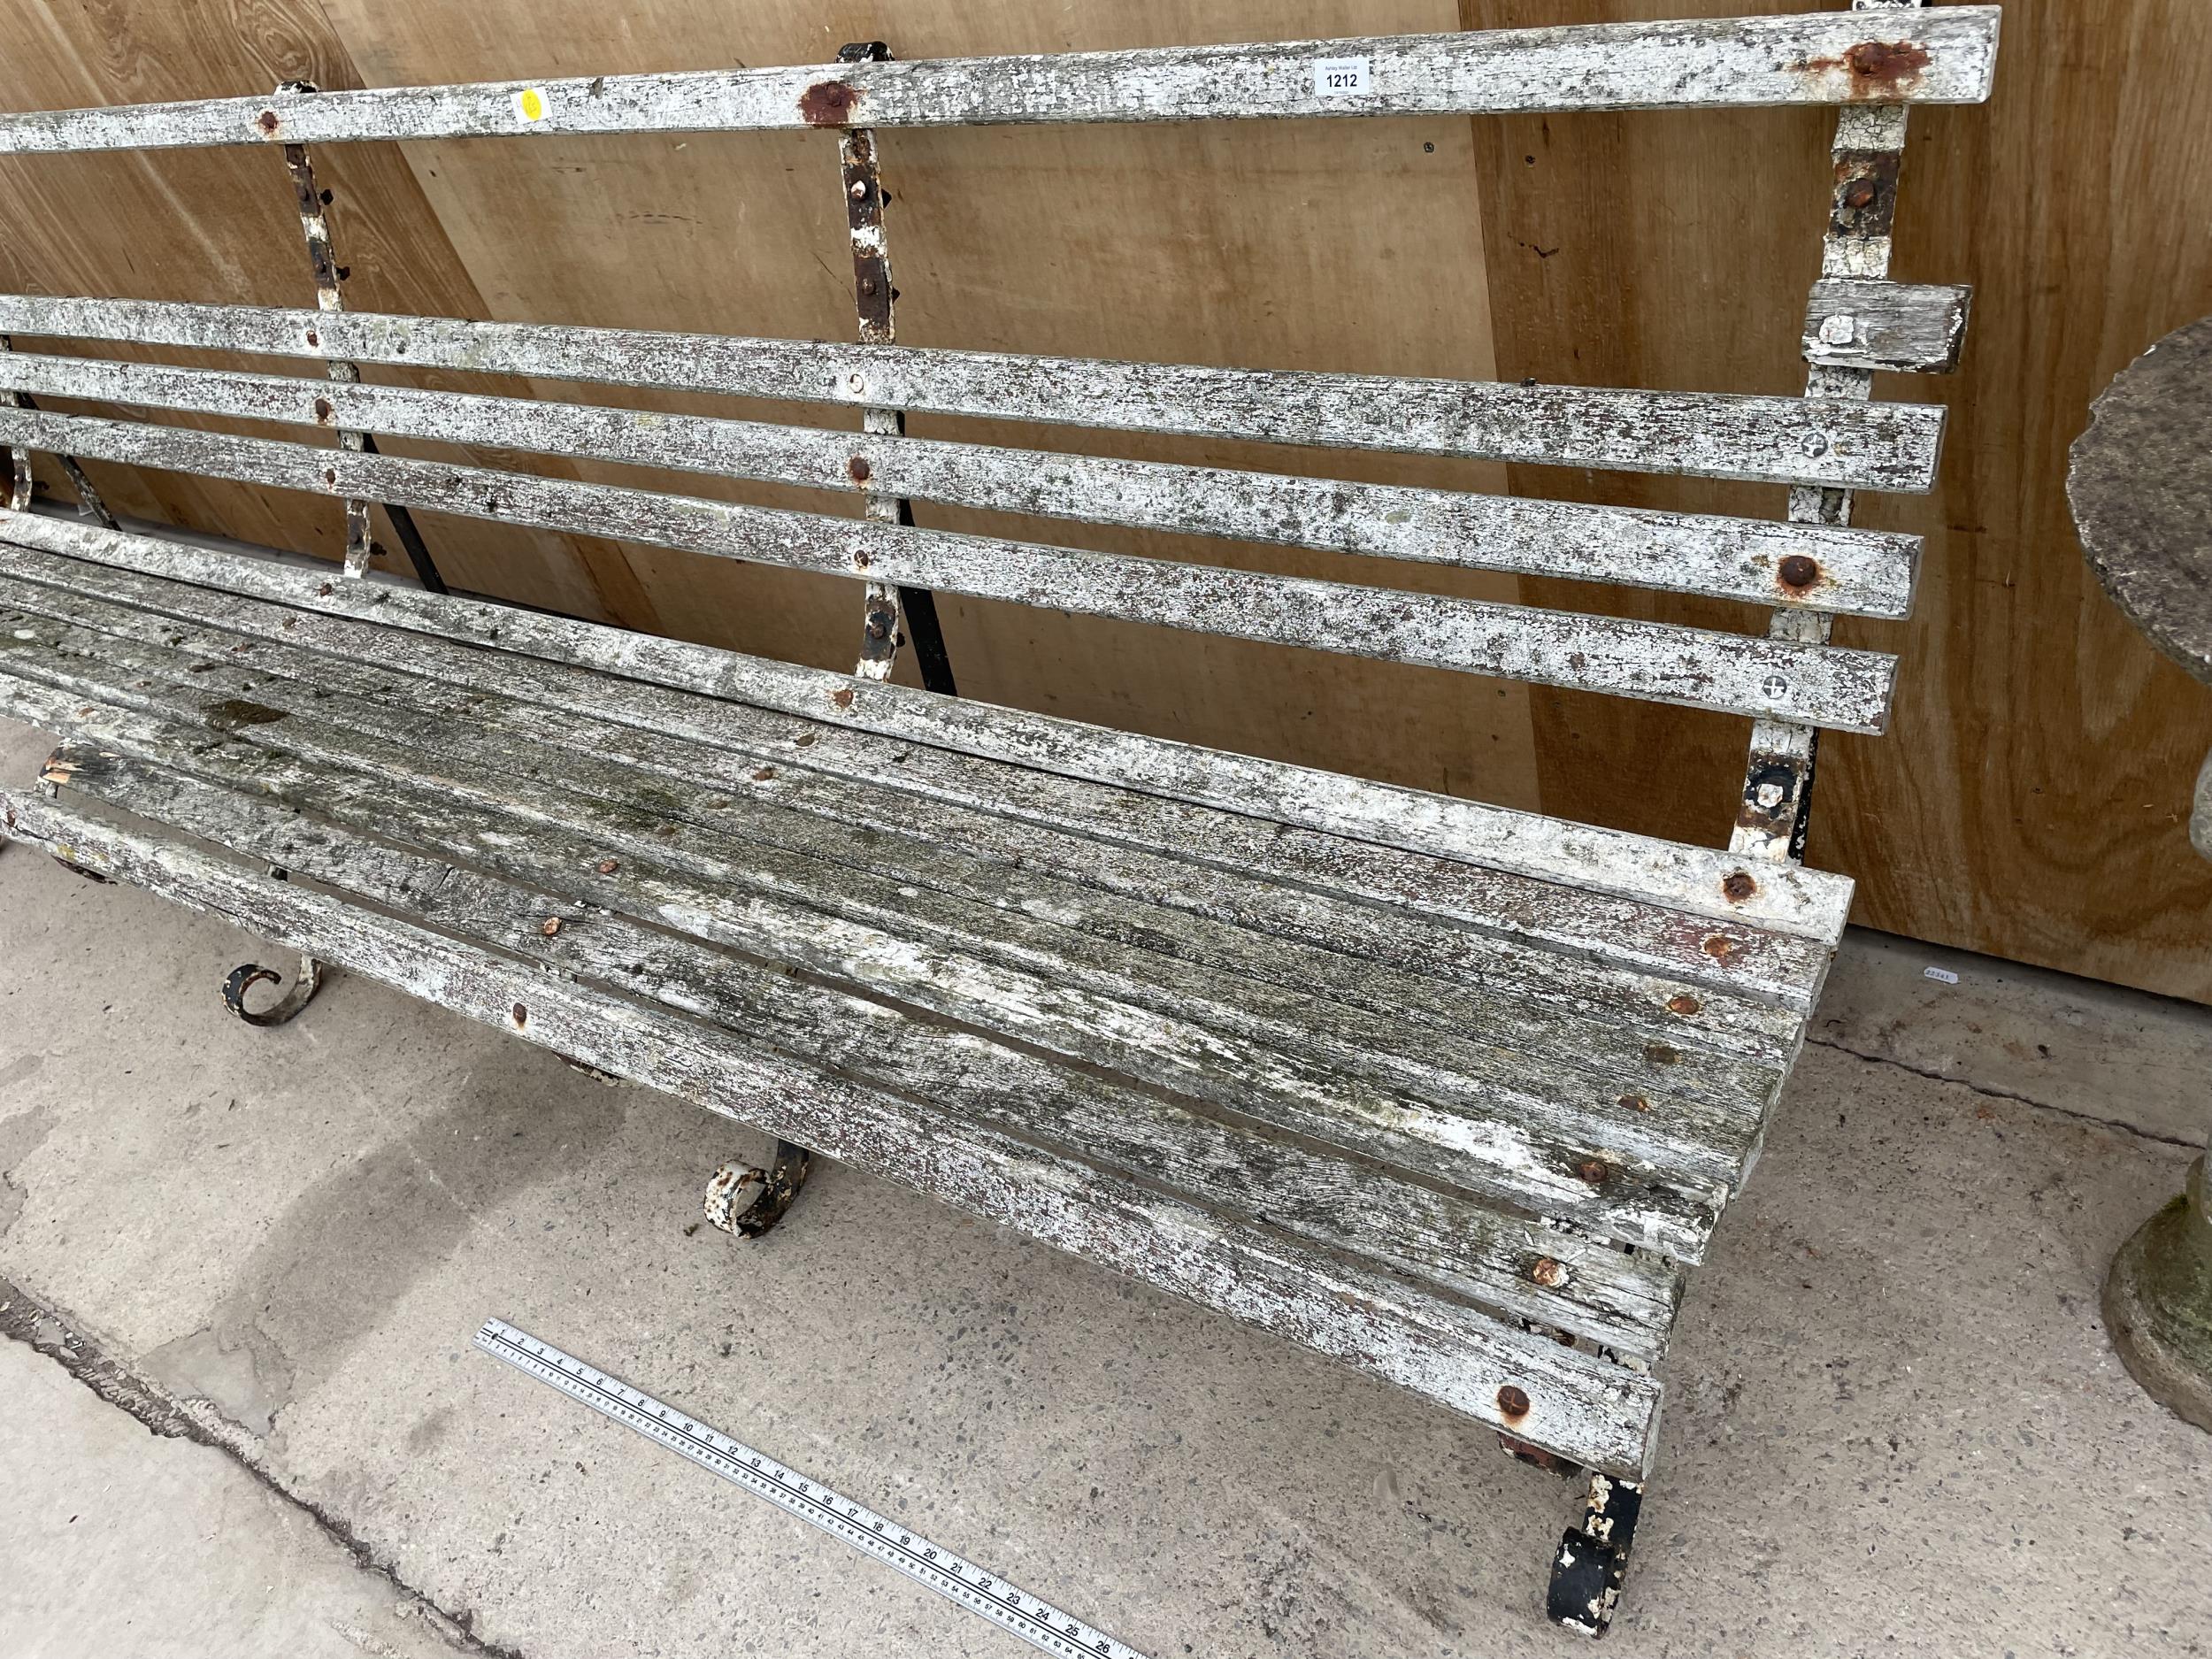 A LARGE VINTAGE WROUGHT IRON AND SLATTED WOODEN GARDEN BENCH - Image 2 of 5